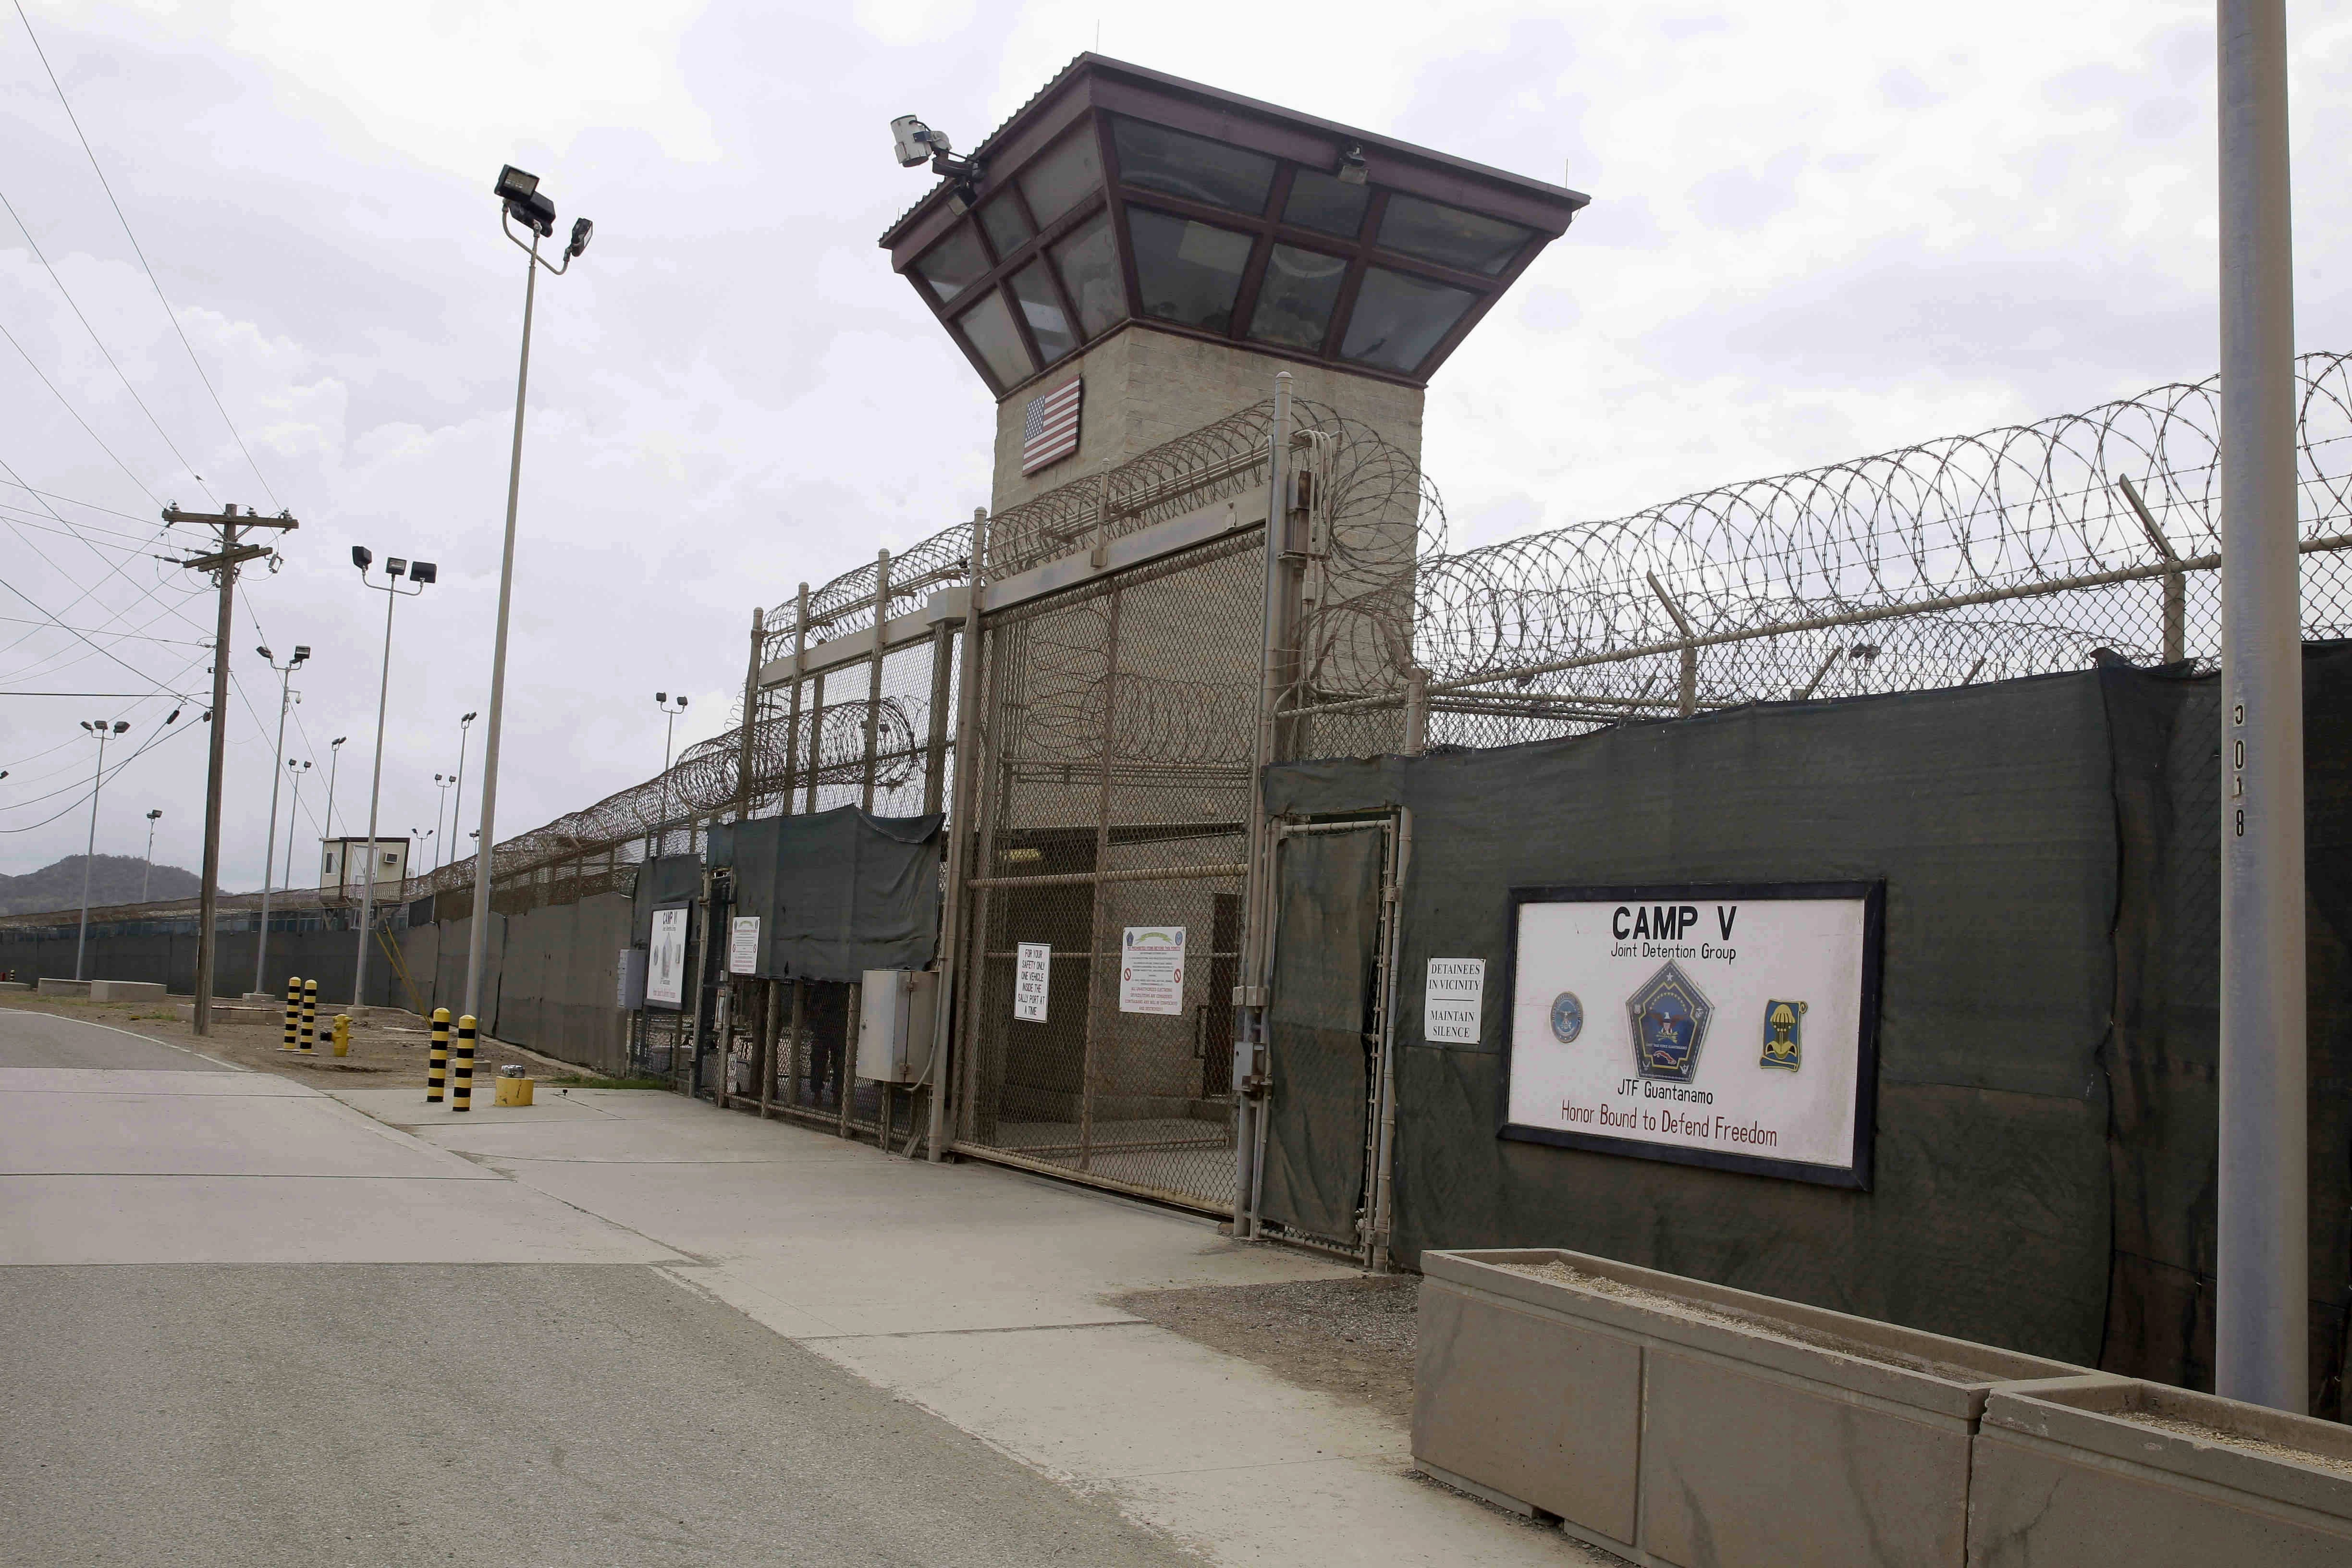 The entrance to Camp 5 and Camp 6 at the US military's Guantanamo Bay detention centre, at Guantanamo Bay Naval Base, Cuba. An American who fought with Islamic State may eventually be sent there after he challenged his detention by the US military. Photo: AP